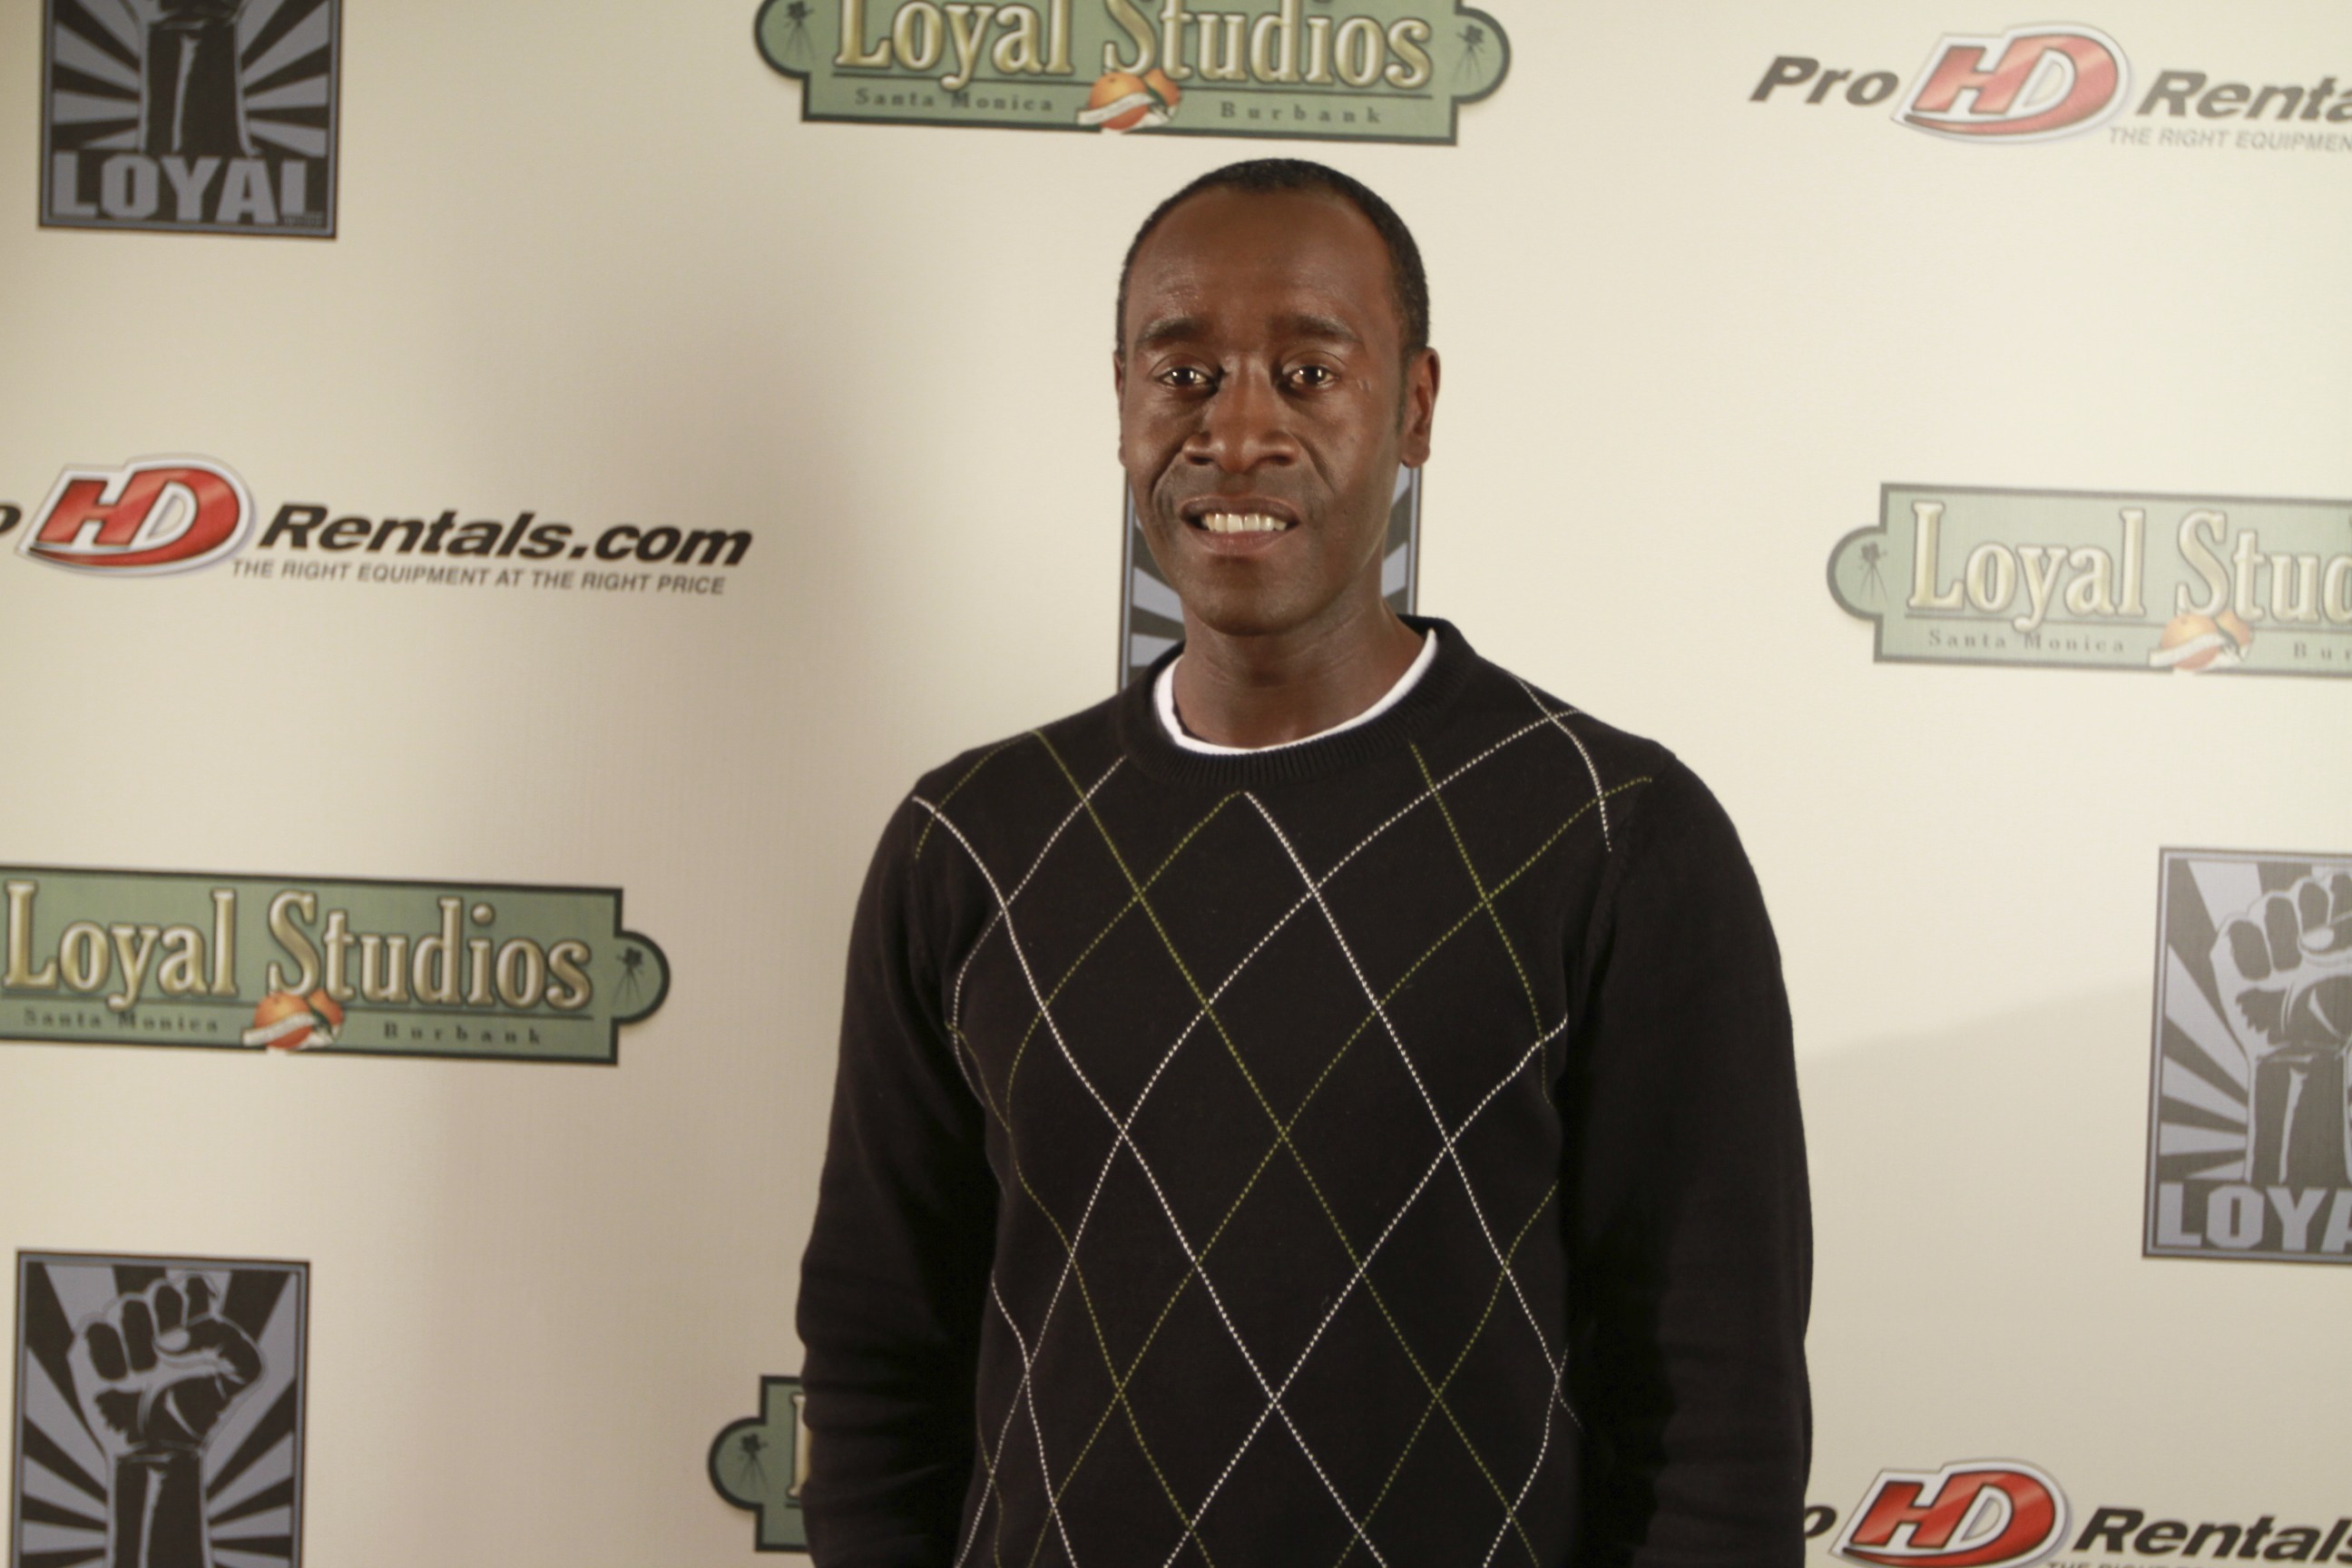 Don Cheadle says police has stopped him 'more times than I can count'